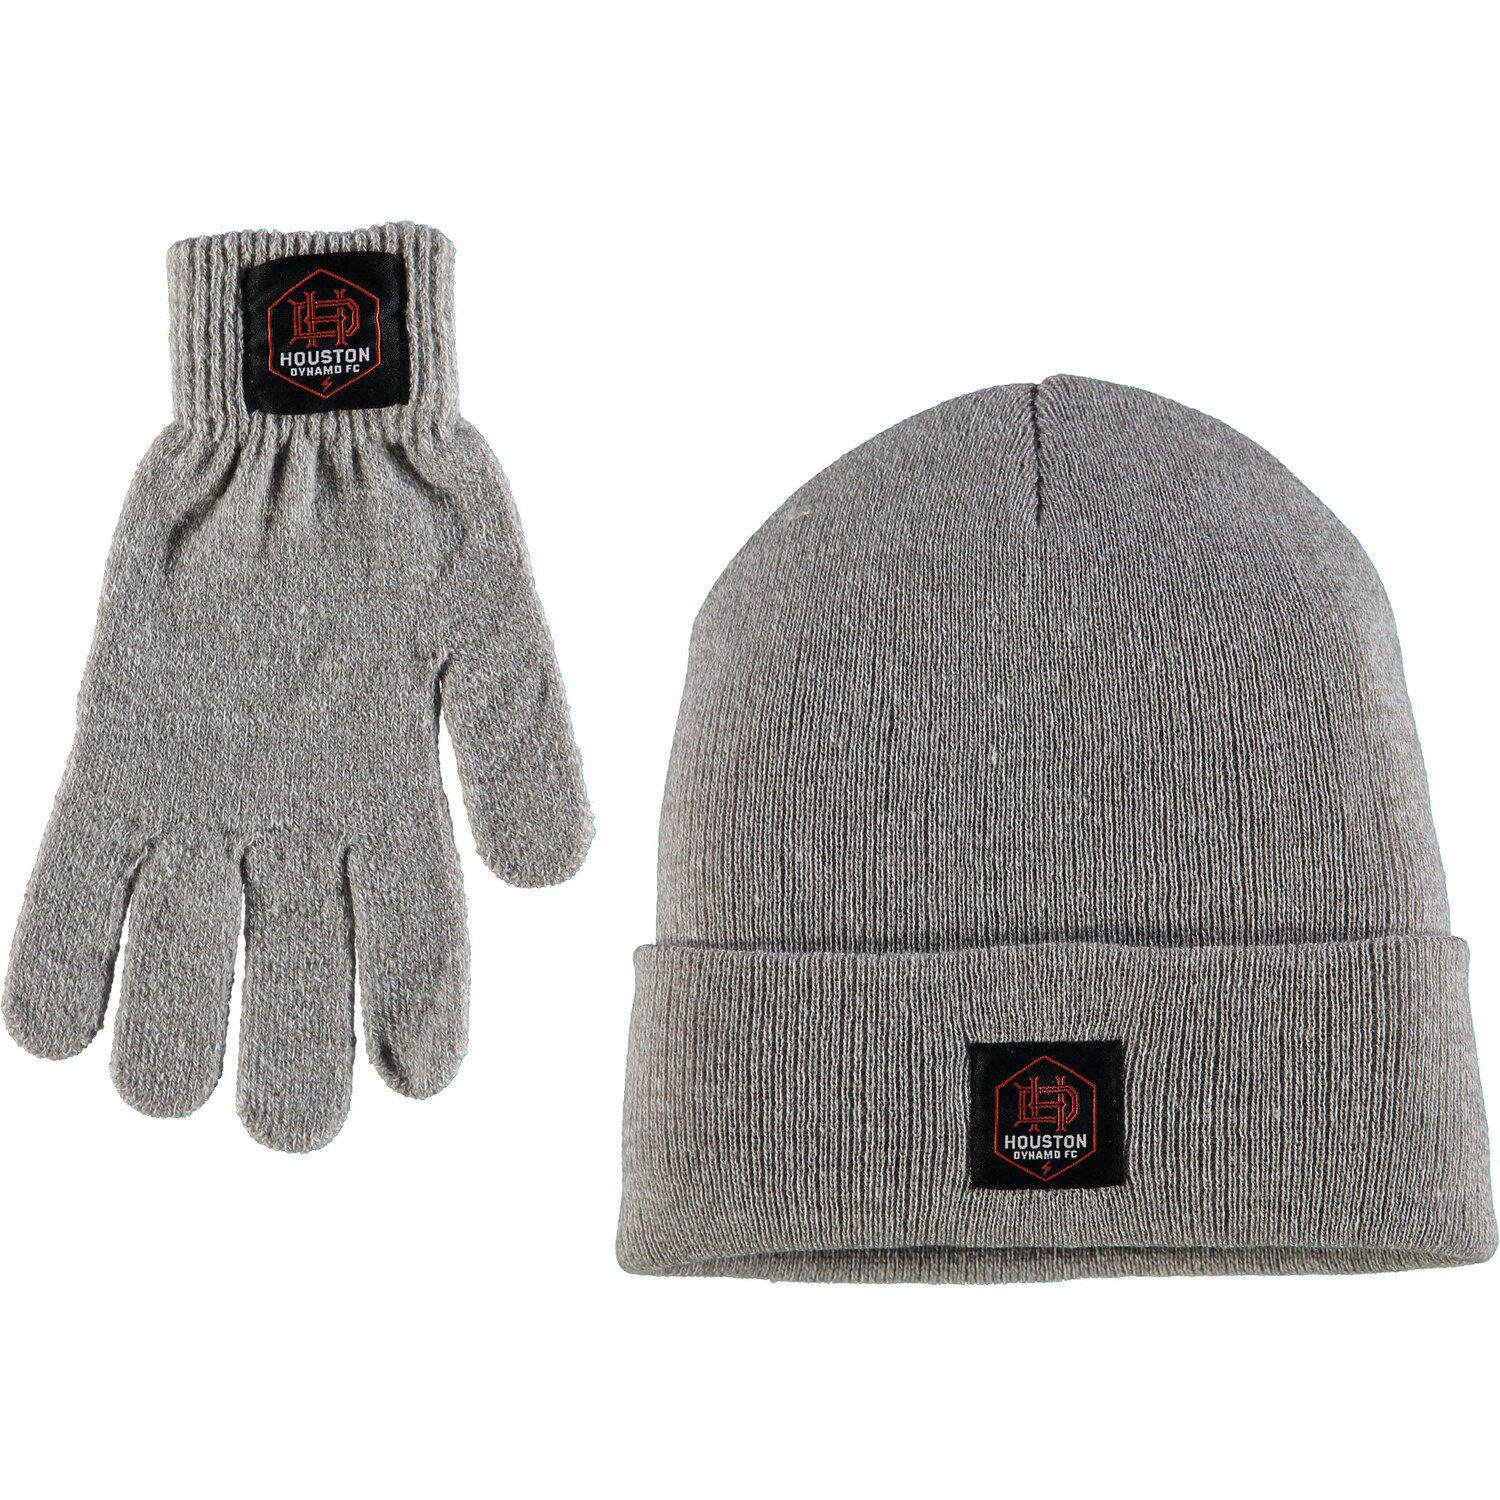 Image for Unbranded Women's ZooZatz Heathered Gray Houston Dynamo FC Cuffed Knit Hat & Gloves Set at Kohl's.